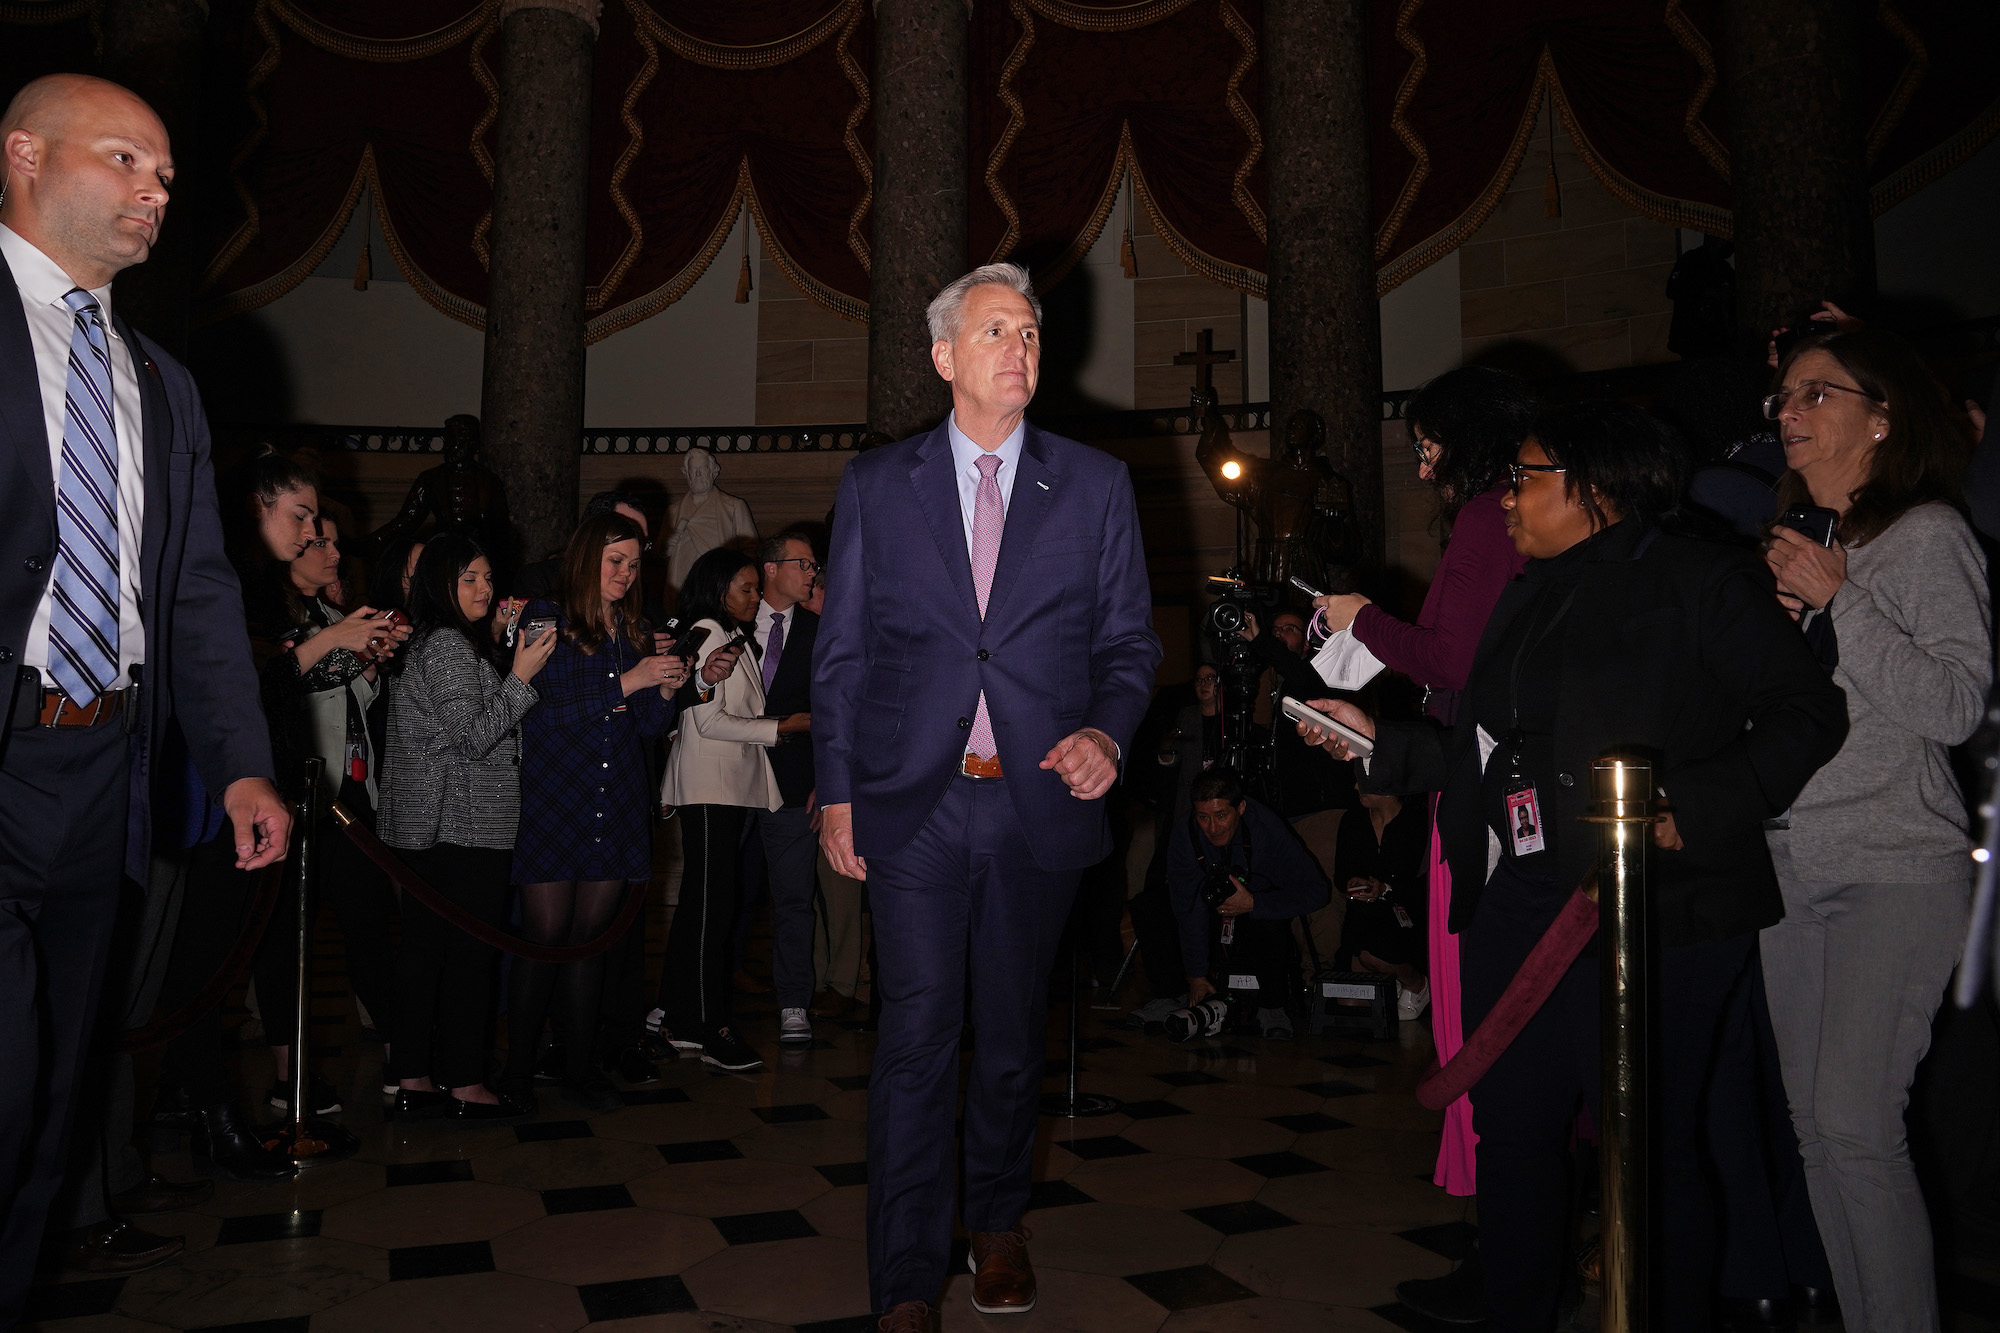 Newly-elected Speaker of the U.S. House of Representatives Kevin McCarthy (R-CA) spoke with reporters in Statue Hall at the Capitol on Saturday morning.